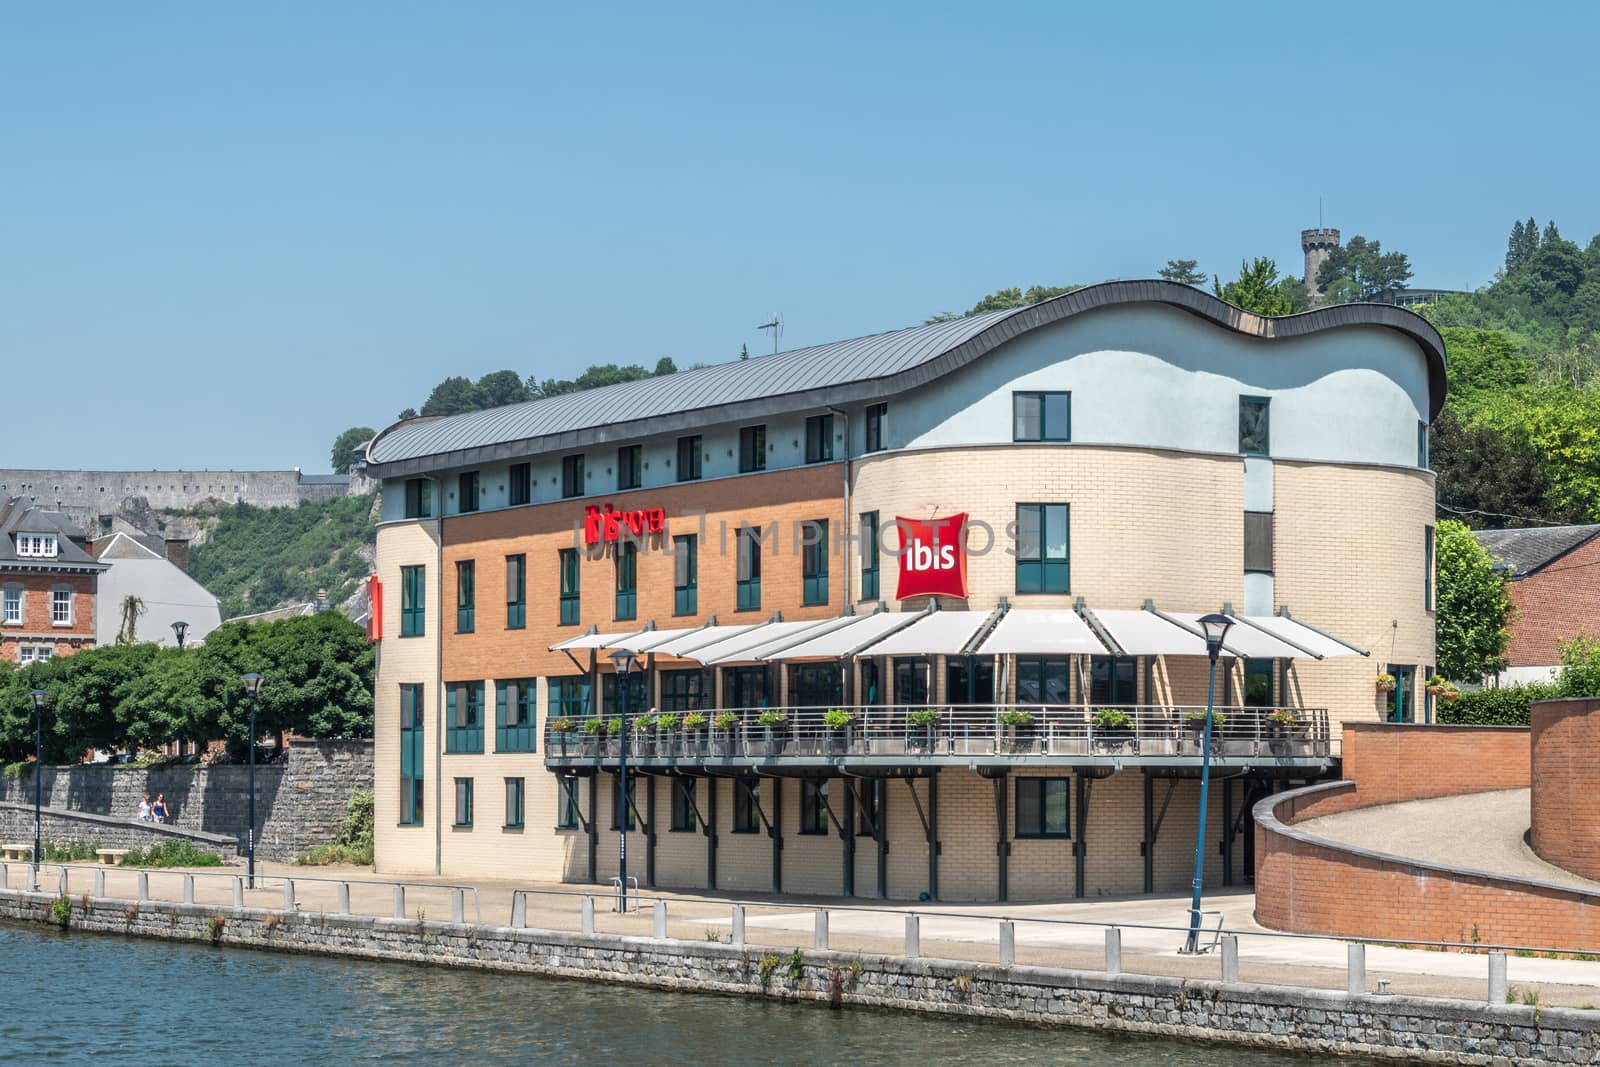 Ibis Hotel along Meuse River in Dinant, Belgium. by Claudine